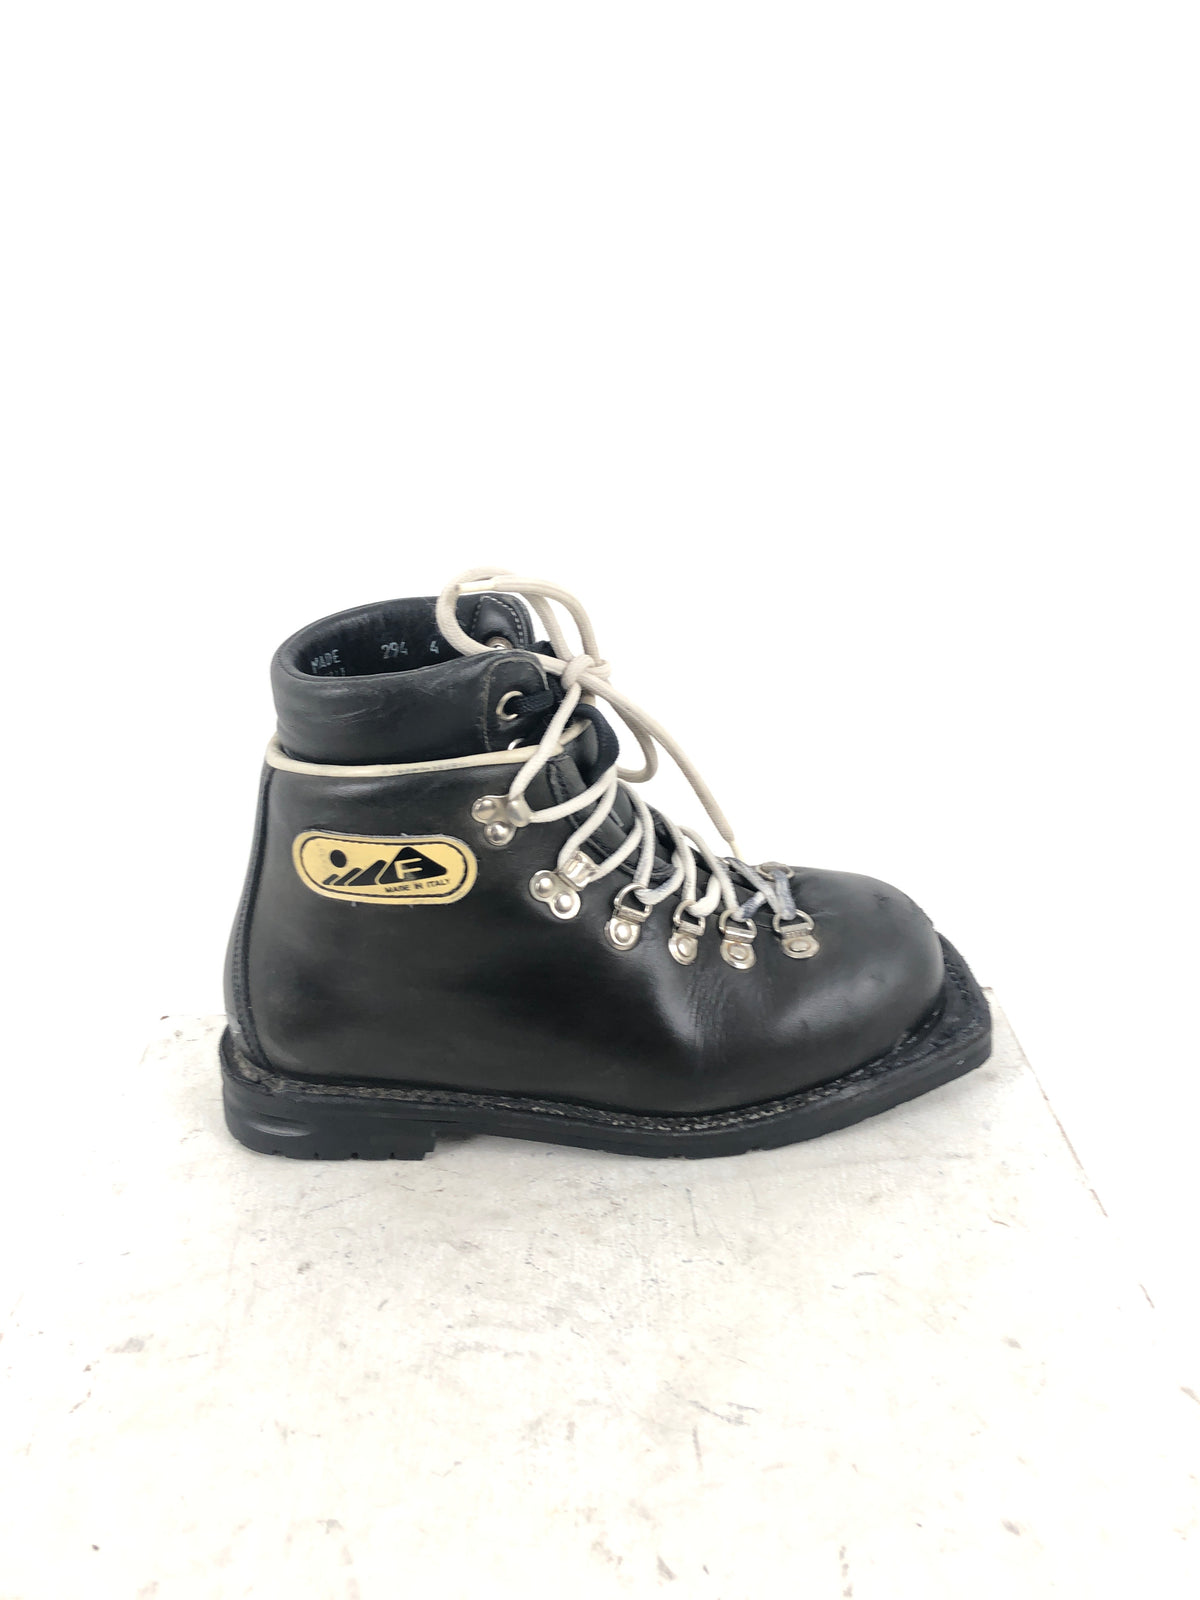 Size 4 Fabiano Double Leather Boots (Used)